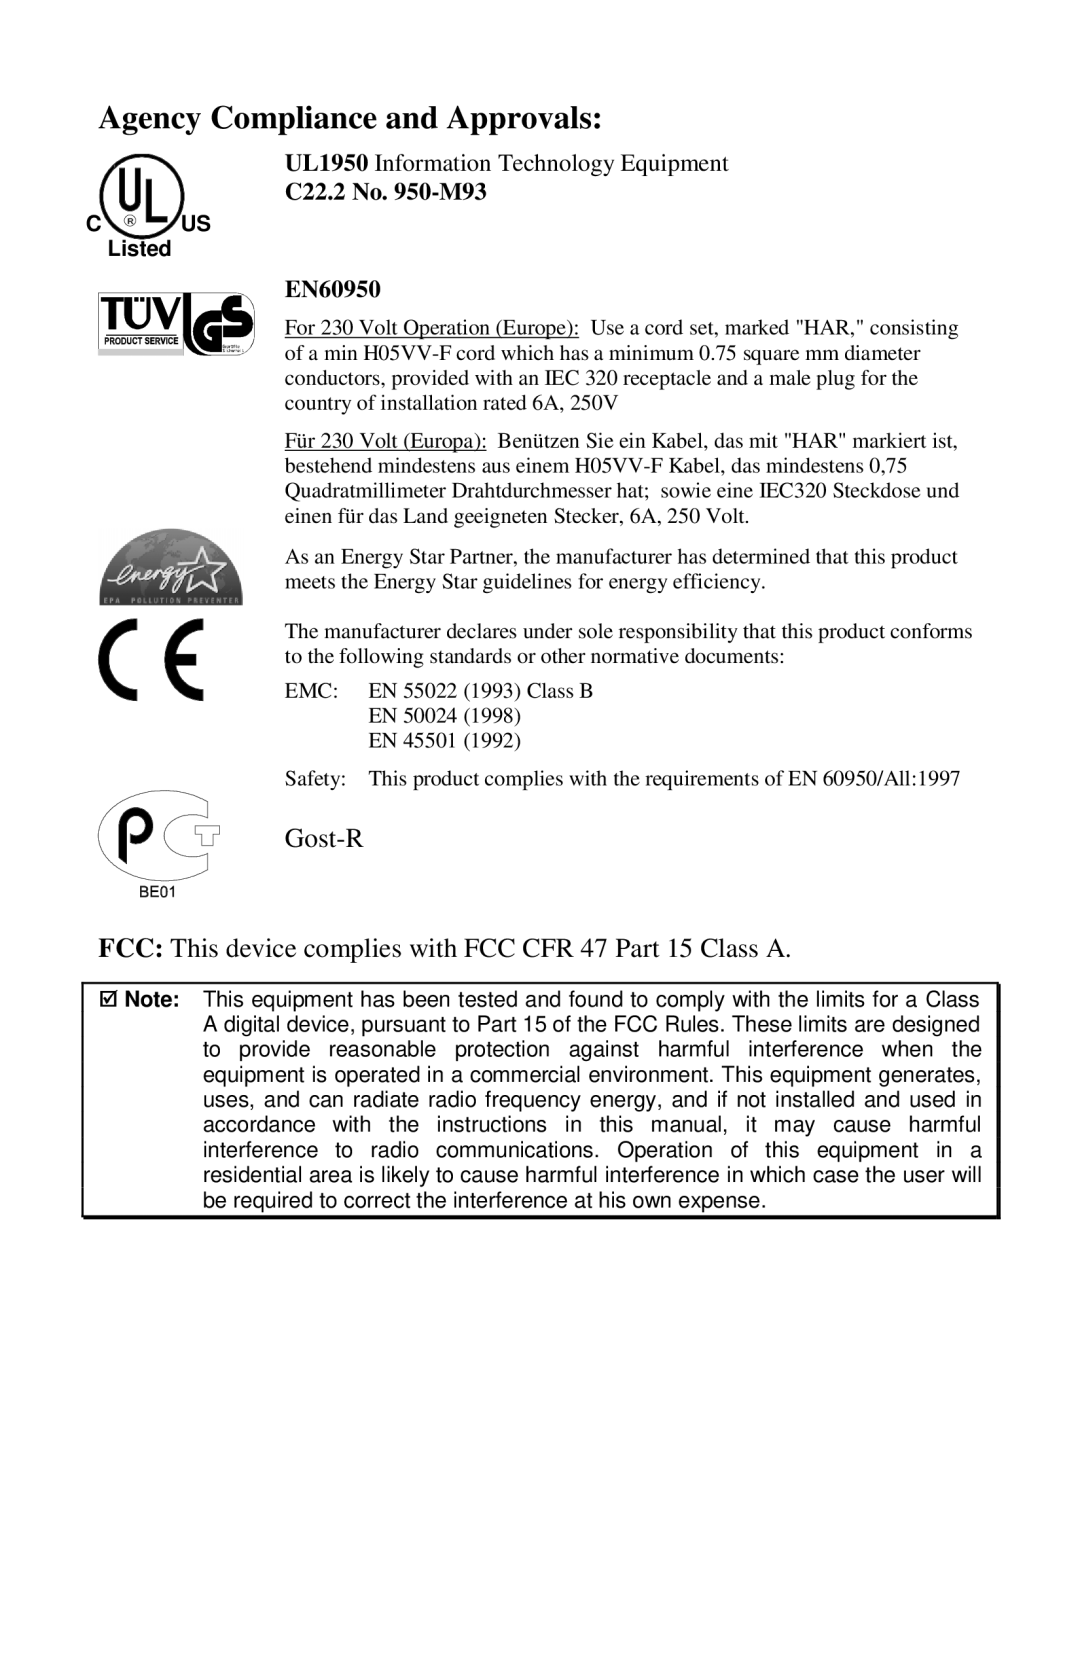 Pitney Bowes J693 manual Agency Compliance and Approvals, Gost-R FCC This device complies with FCC CFR 47 Part 15 Class A 